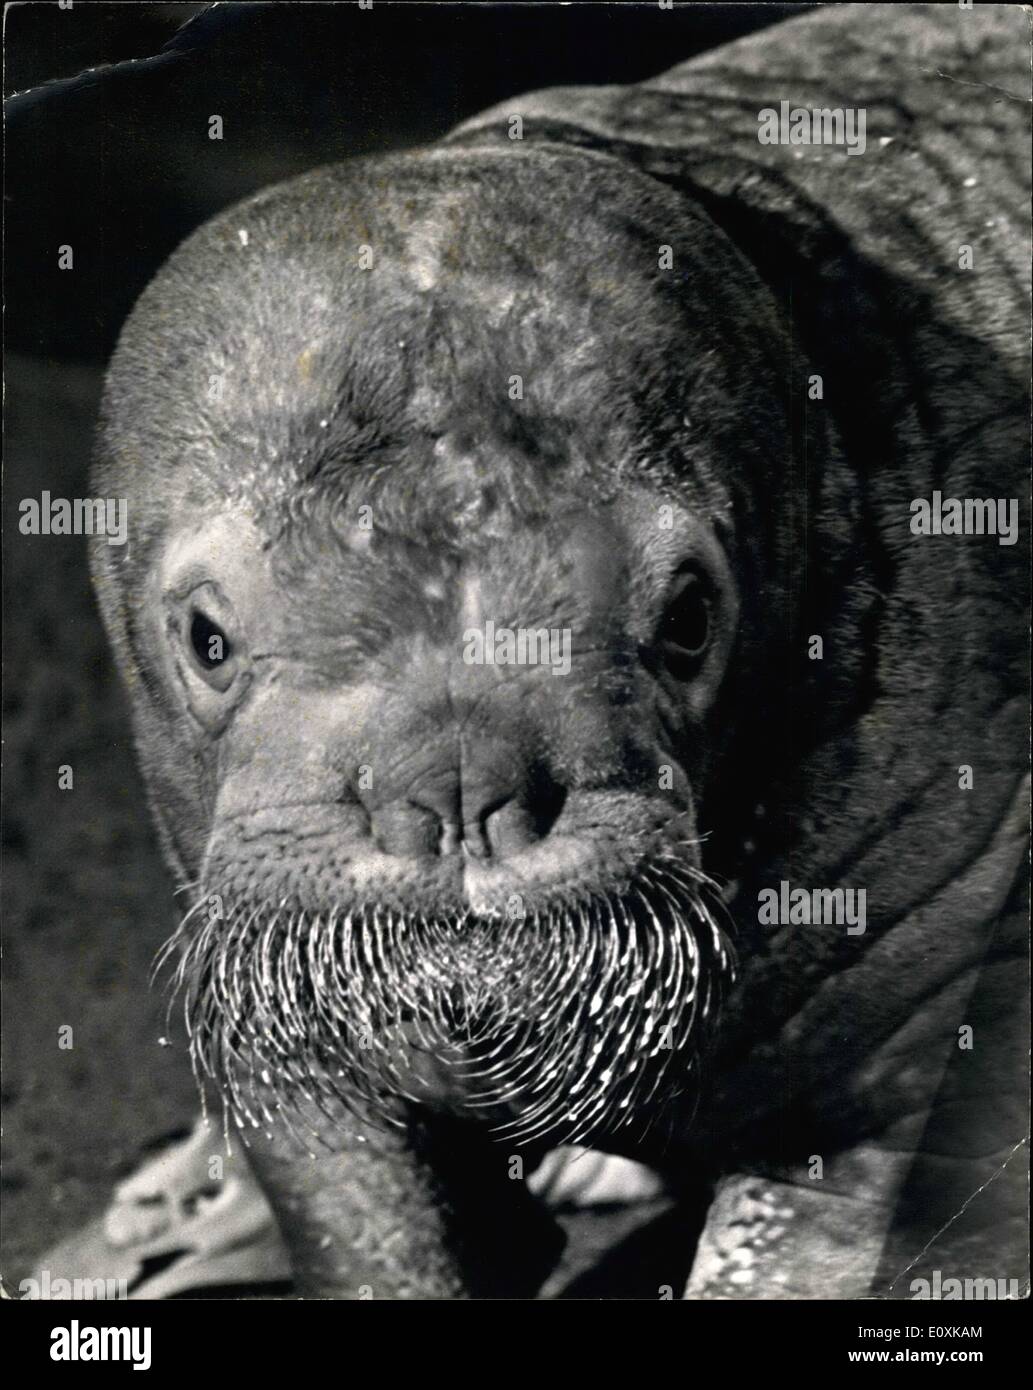 Mar. 03, 1967 - ''Alice'' the 145-lbs, Walrus makes her first appearance at the London Zoo: This lady weighs 145 lbs. and her name is Alice. She was flown in from Amsterdam on Dec. 29th, 1966. and today this 3 1/2 month-old Welrus made her first appearance at the London Zoo. Alice lives on a special diet of herrings, milk and vitamins to keep her waistline in trim, while nothing has been spared to make her feel at home in the Pavillion until her new home is ready for her. Photo shows Alice with her soulful eyes and whiskers makes her debut at the London Zoo today. Stock Photo